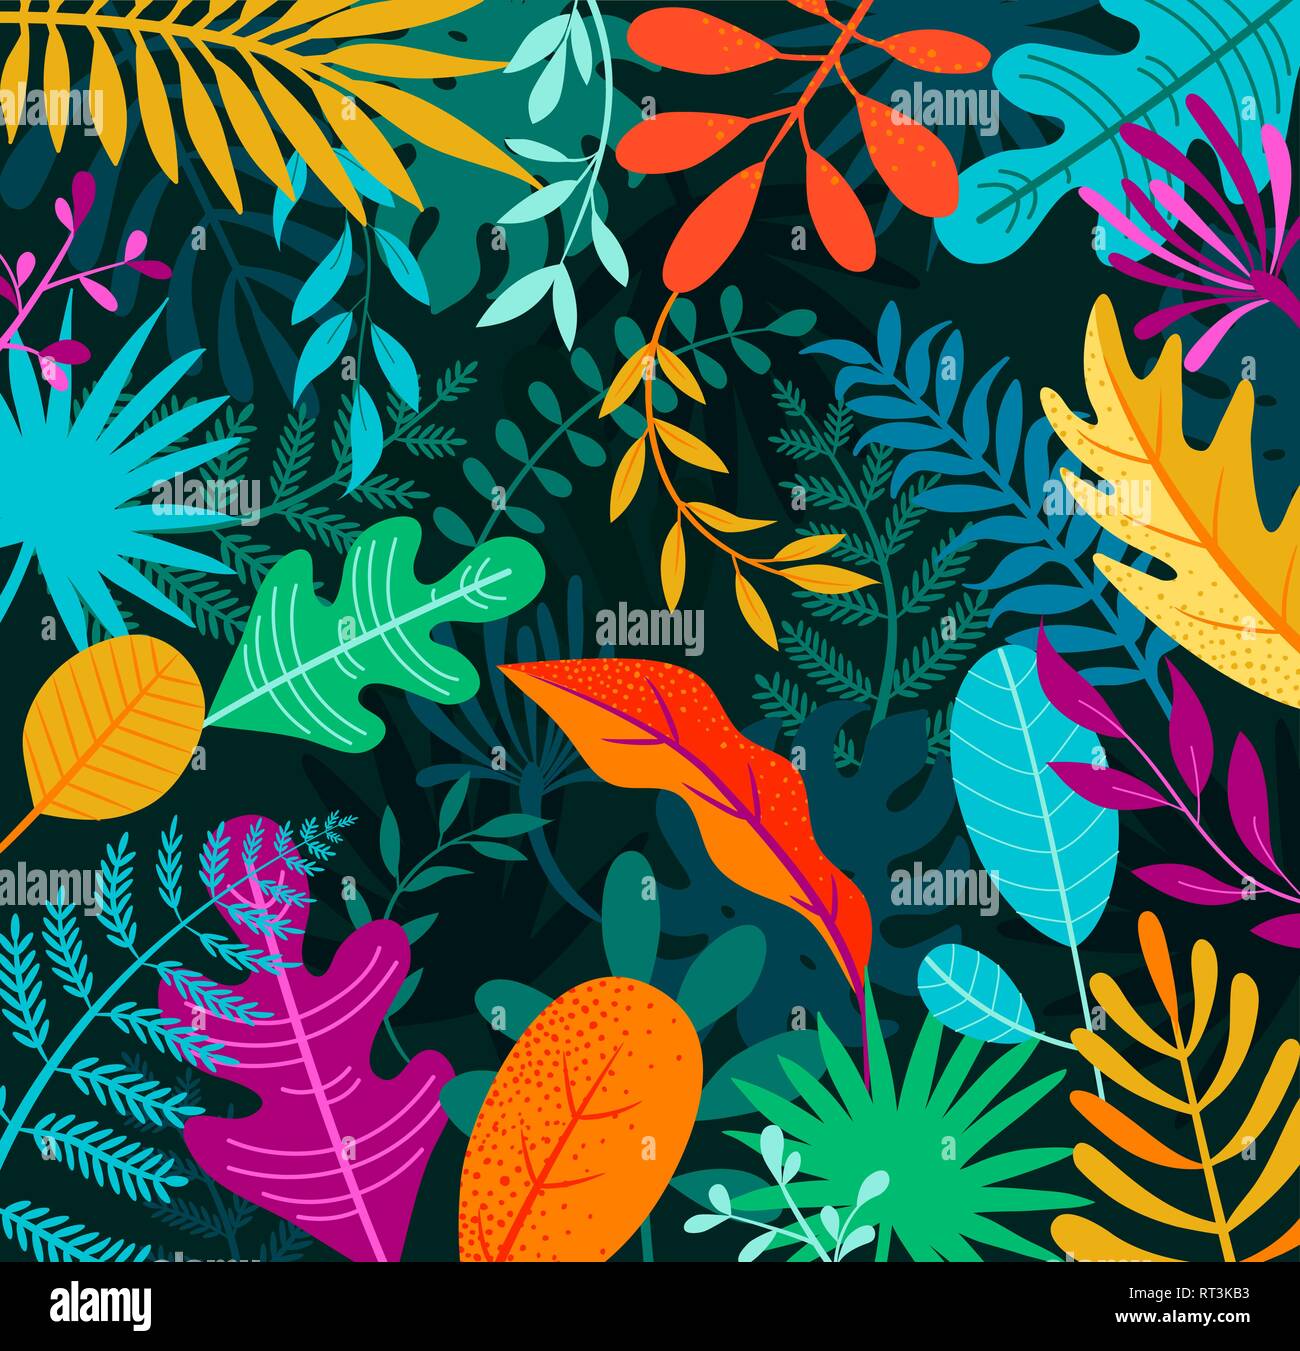 Jungle background with tropical palm leaves. Stock Vector